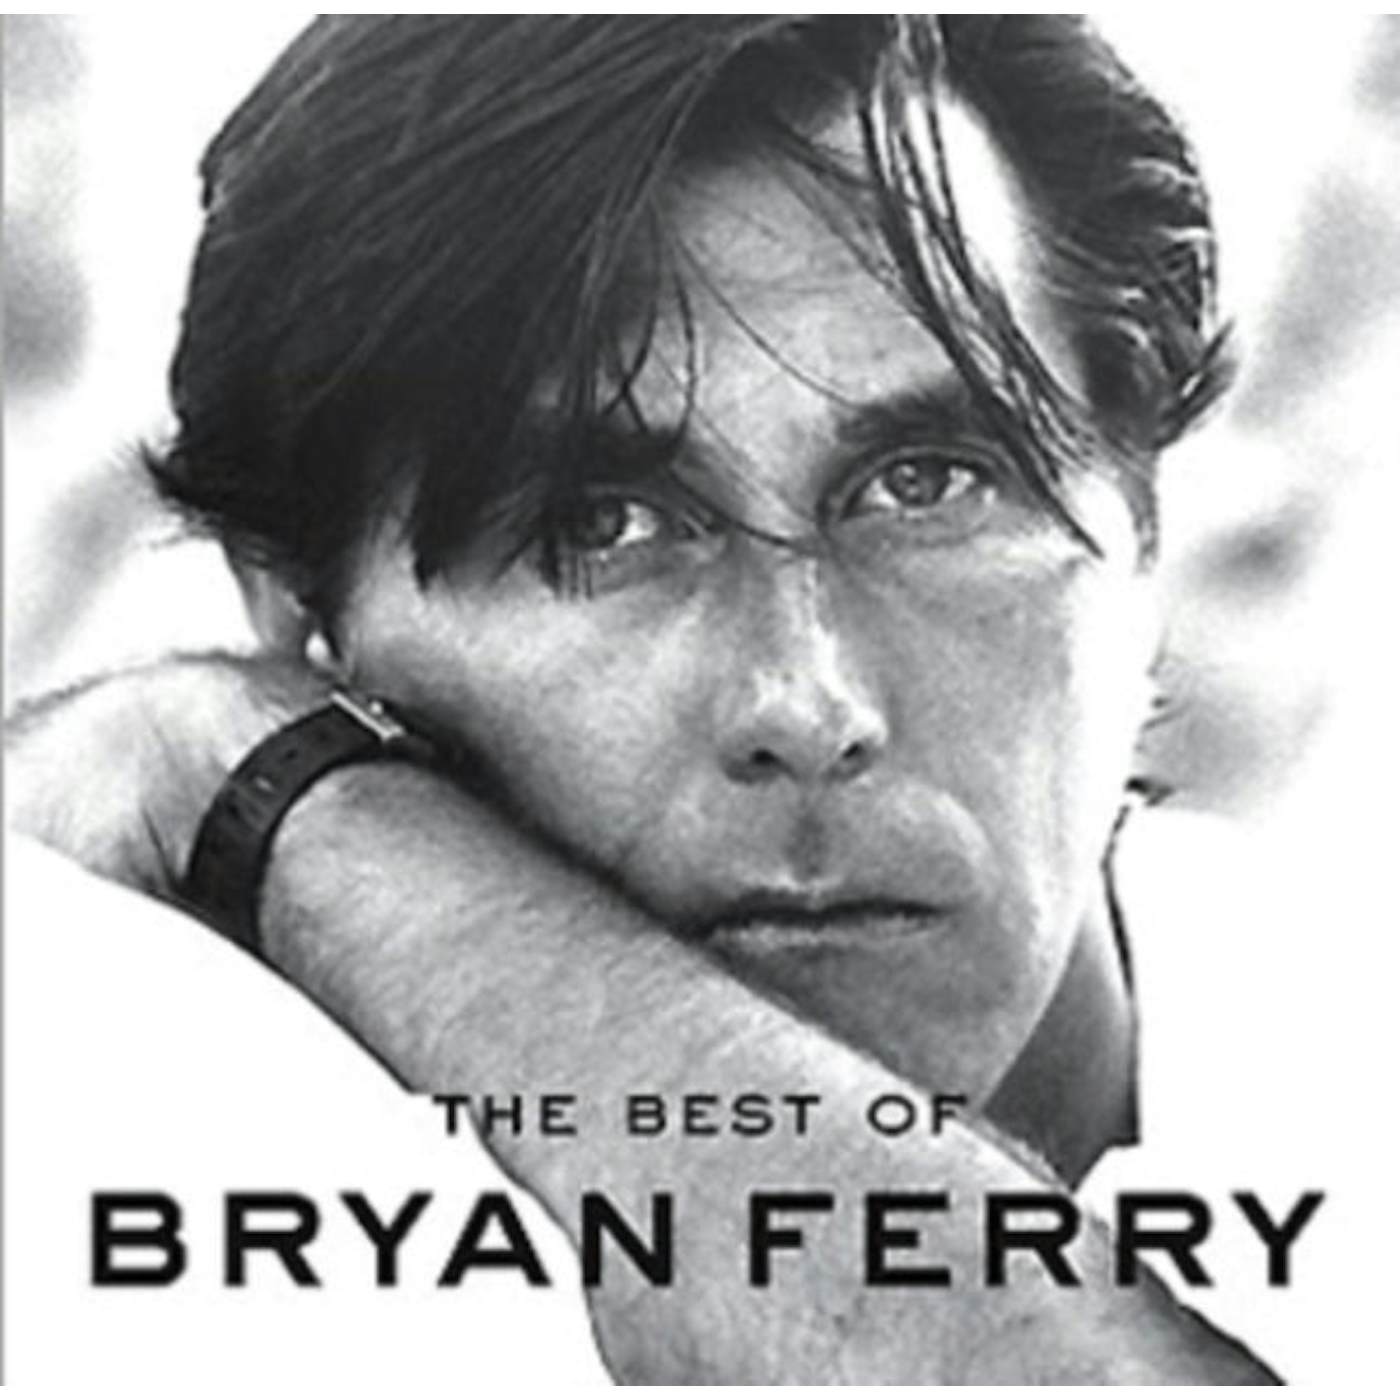 Bryan Ferry CD - The Best Of